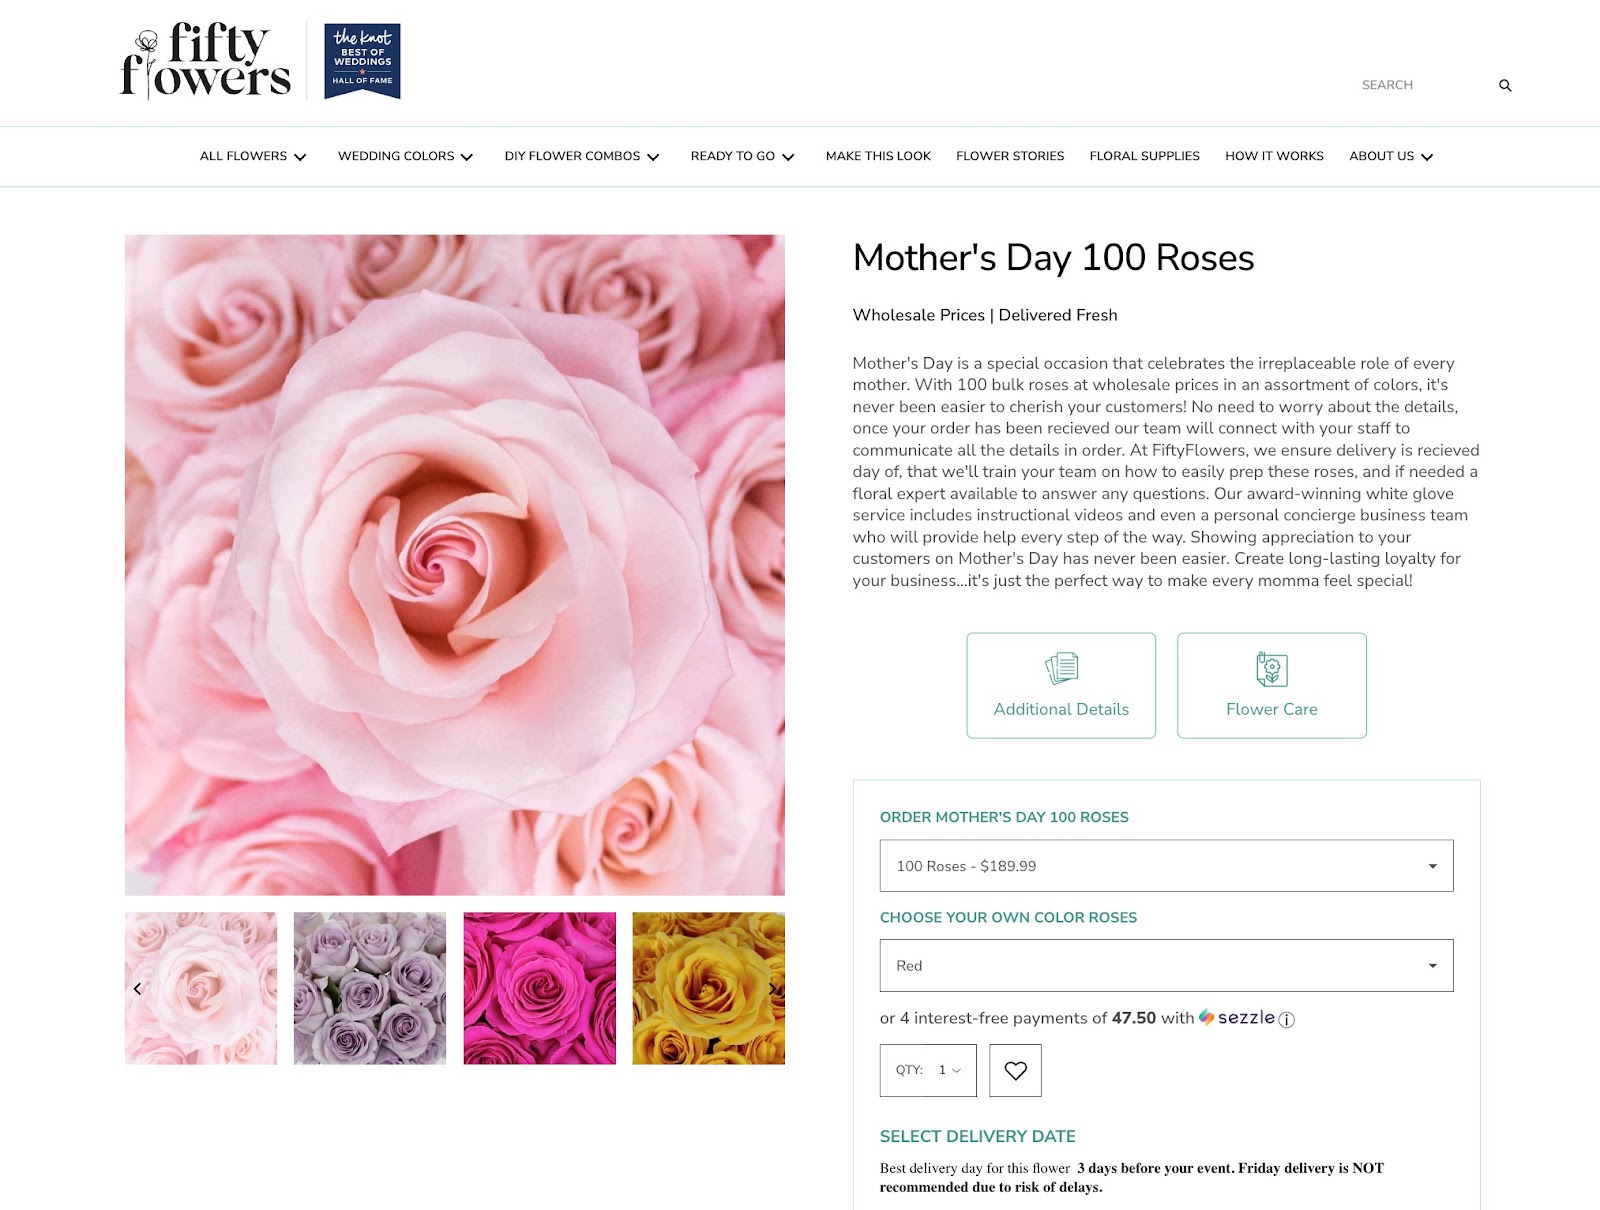 Screenshot of Fifty Flowers' mother day 100 roses bundle on its website